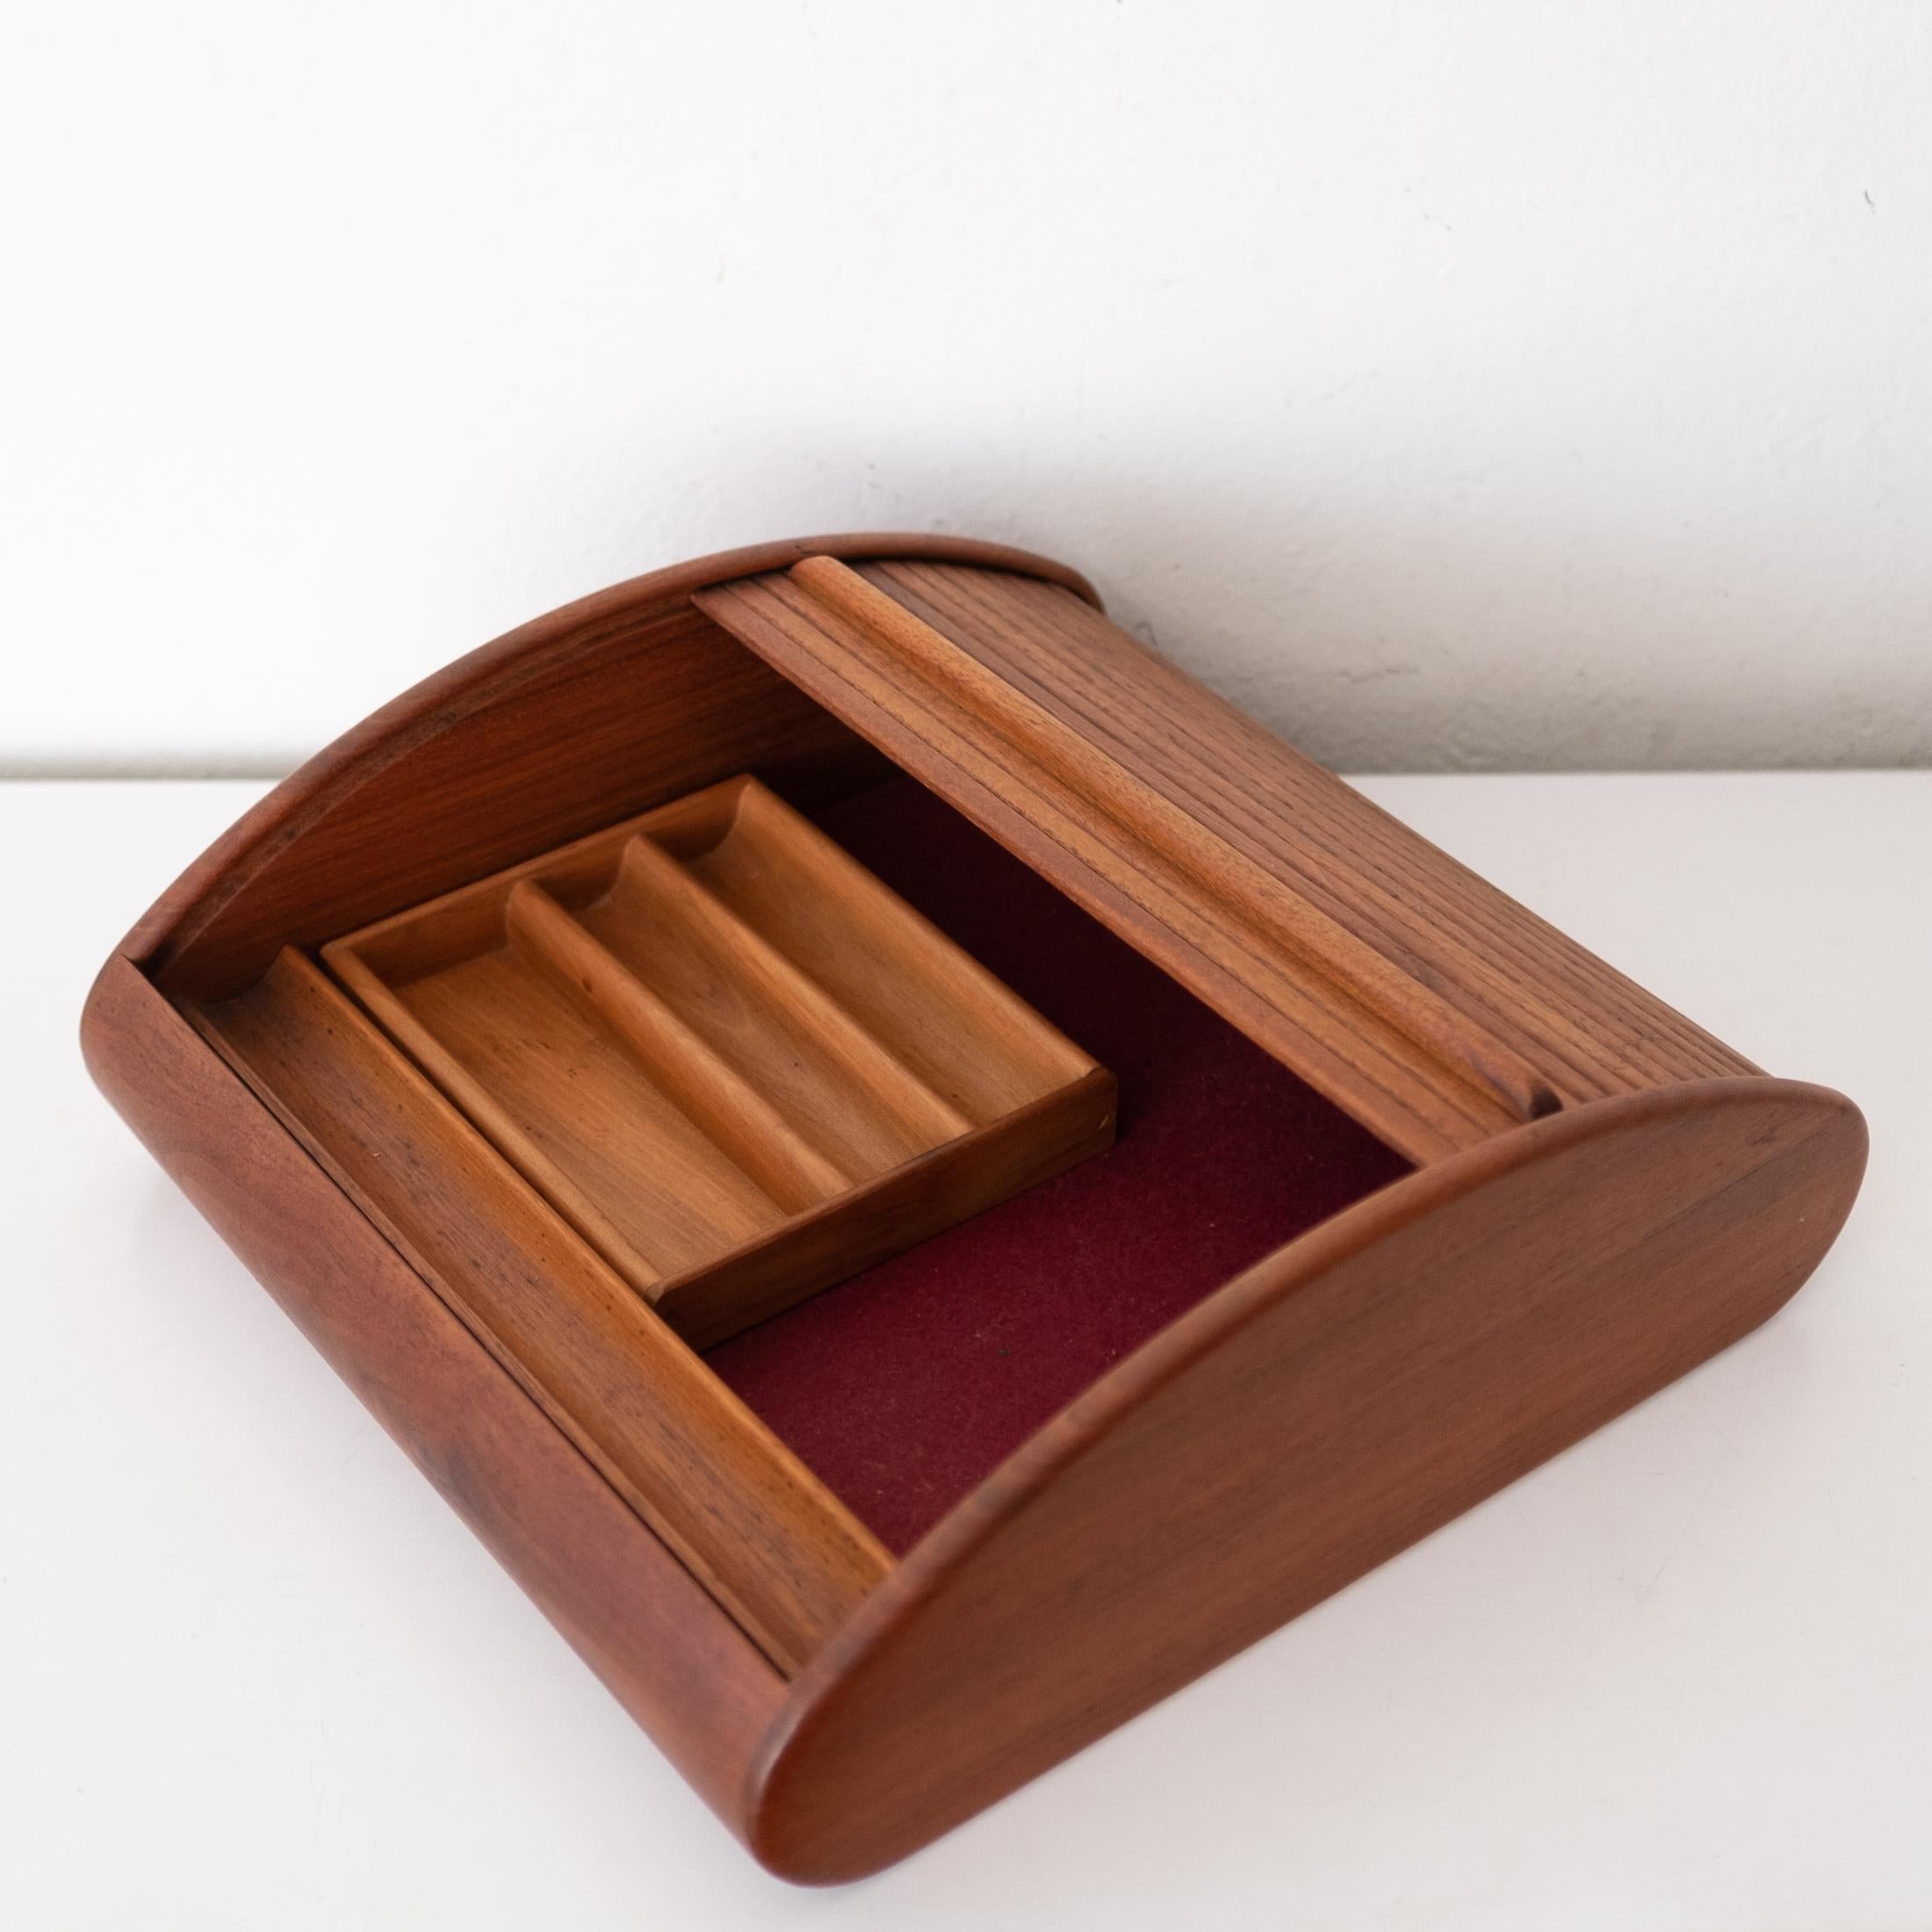 California Design tambour door jewelry box. Nicely crafted felt lined jewelry box with removable tray.